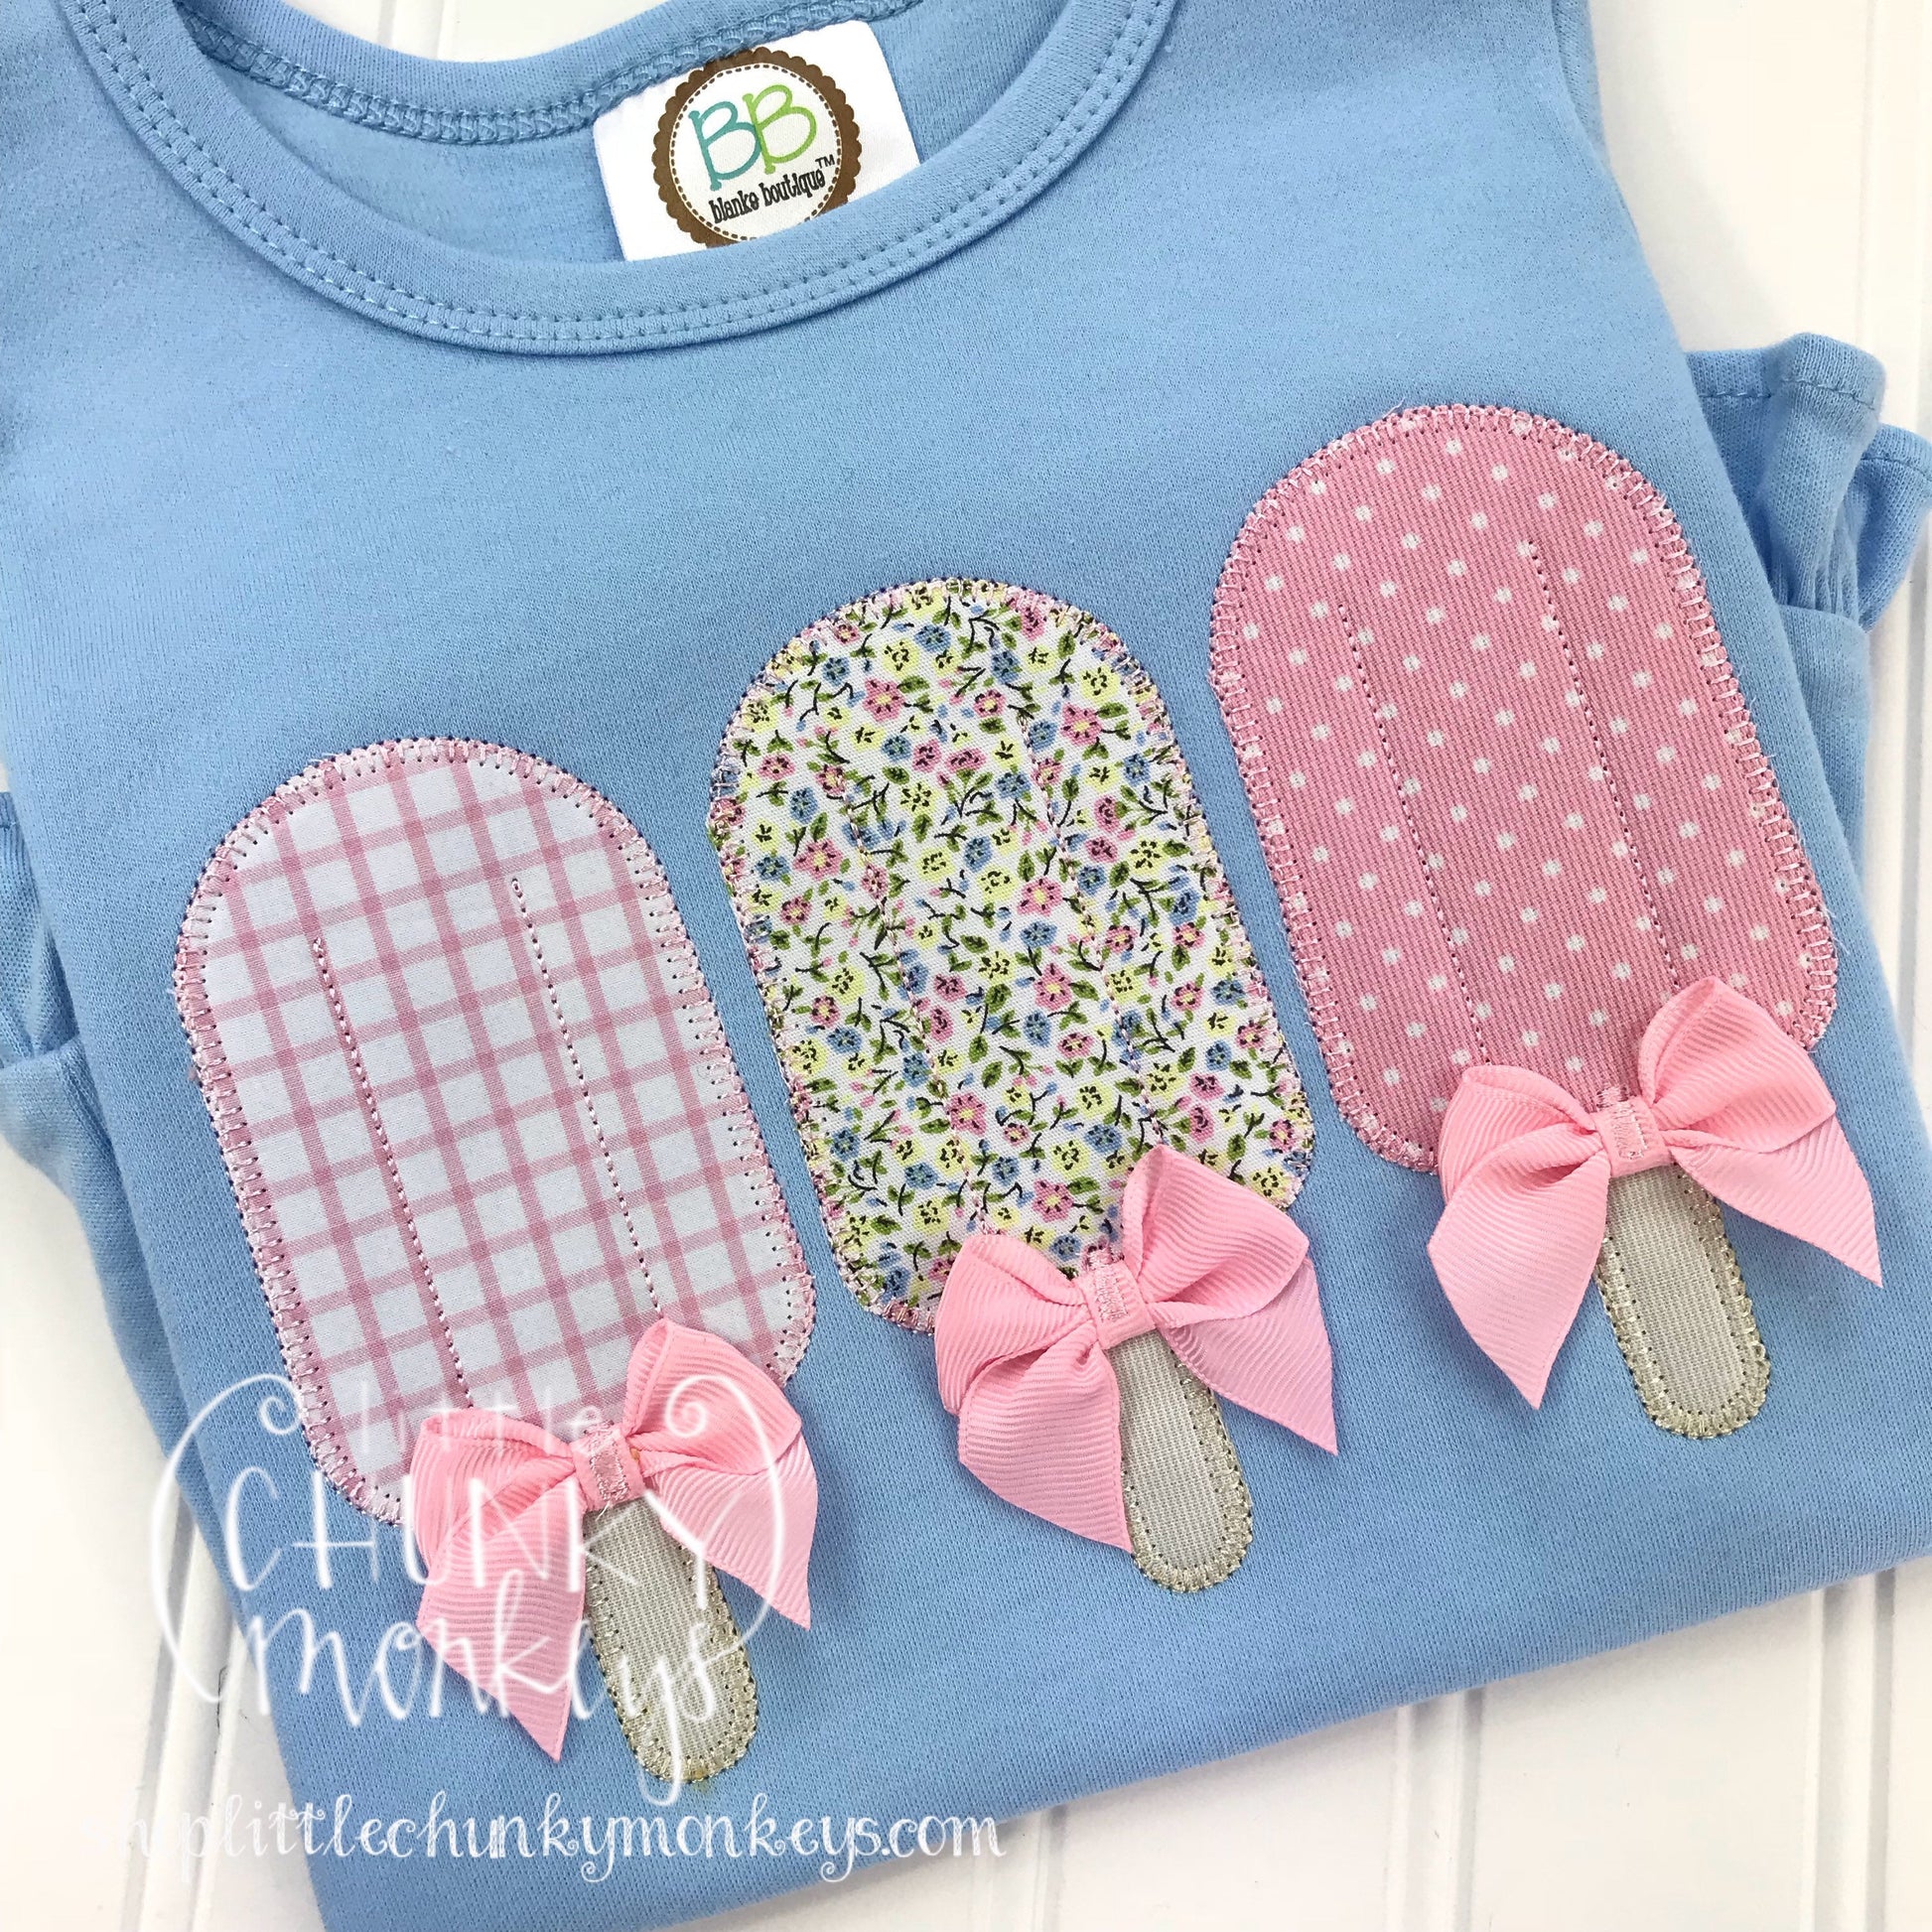 Girl outfit - Girl Shirt - Applique Popsicle Trio with Bows on Light Blue Shirt